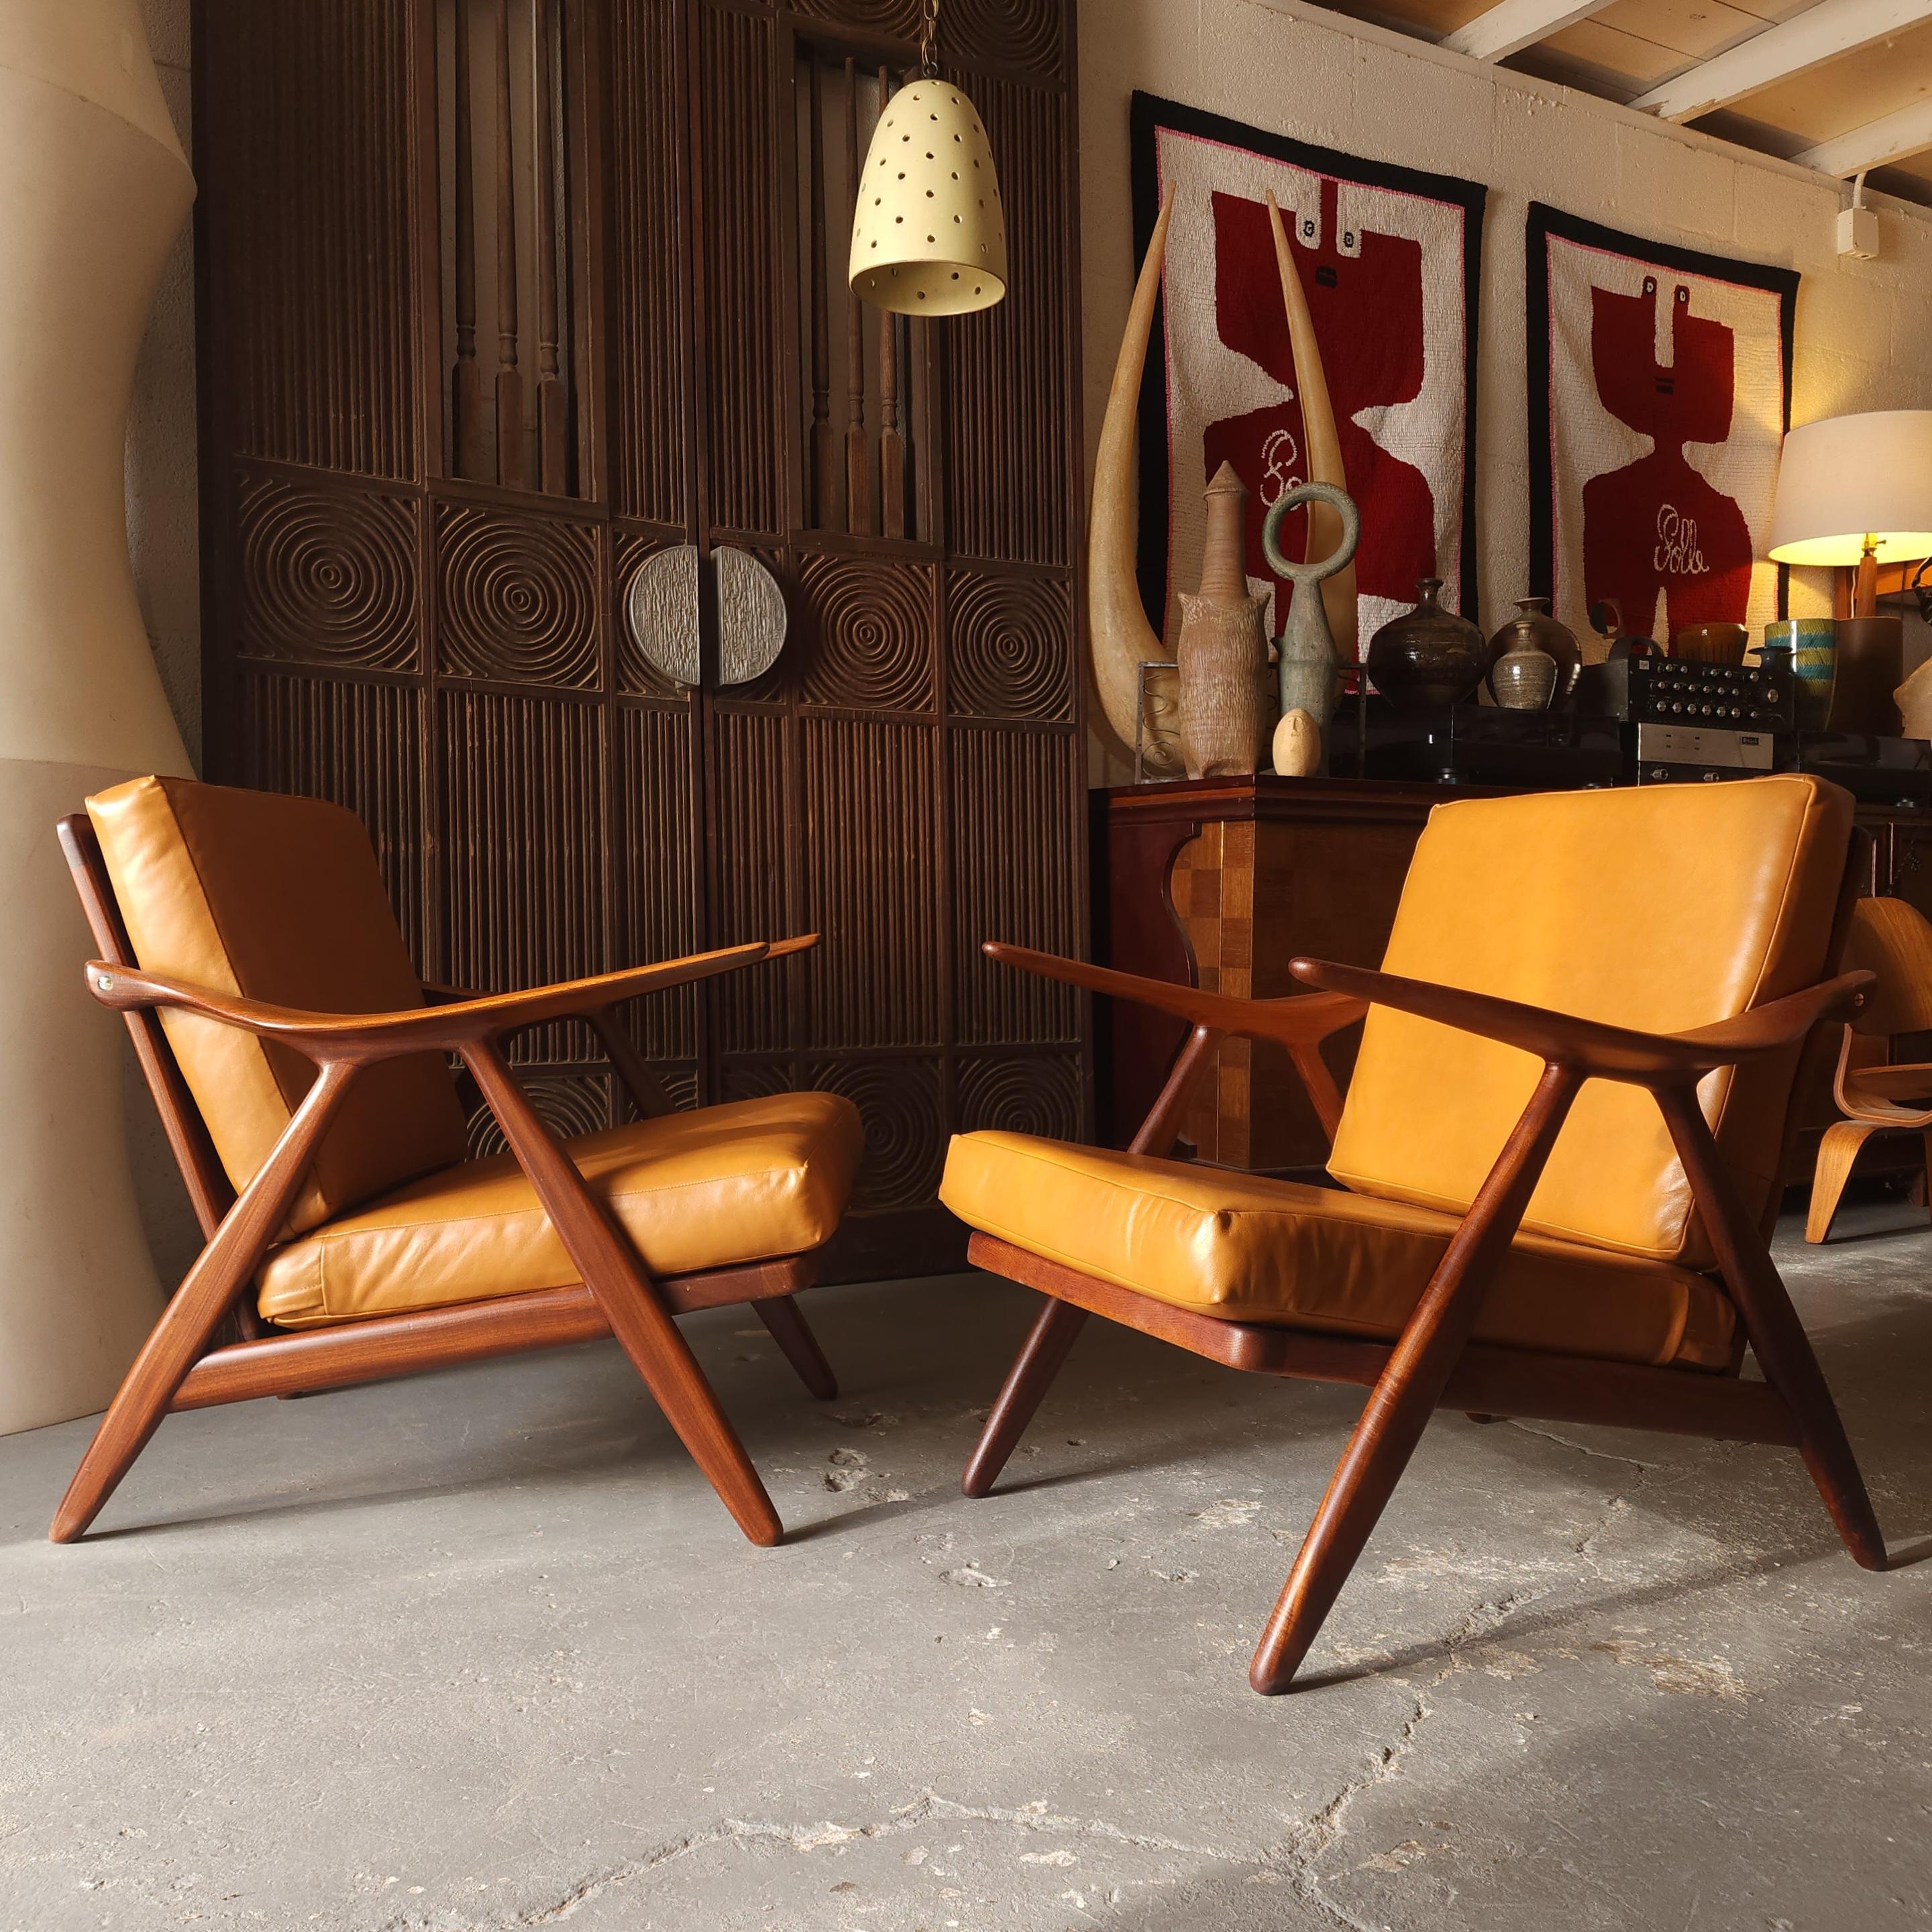 These rich teak lounge chairs by Arne Hovmand Olsen have been refinished and reupholstered. They have such a striking design that encompasses both form and function. The slope of the arm fits the body so well, which is indicative of Hovmand Olsen.